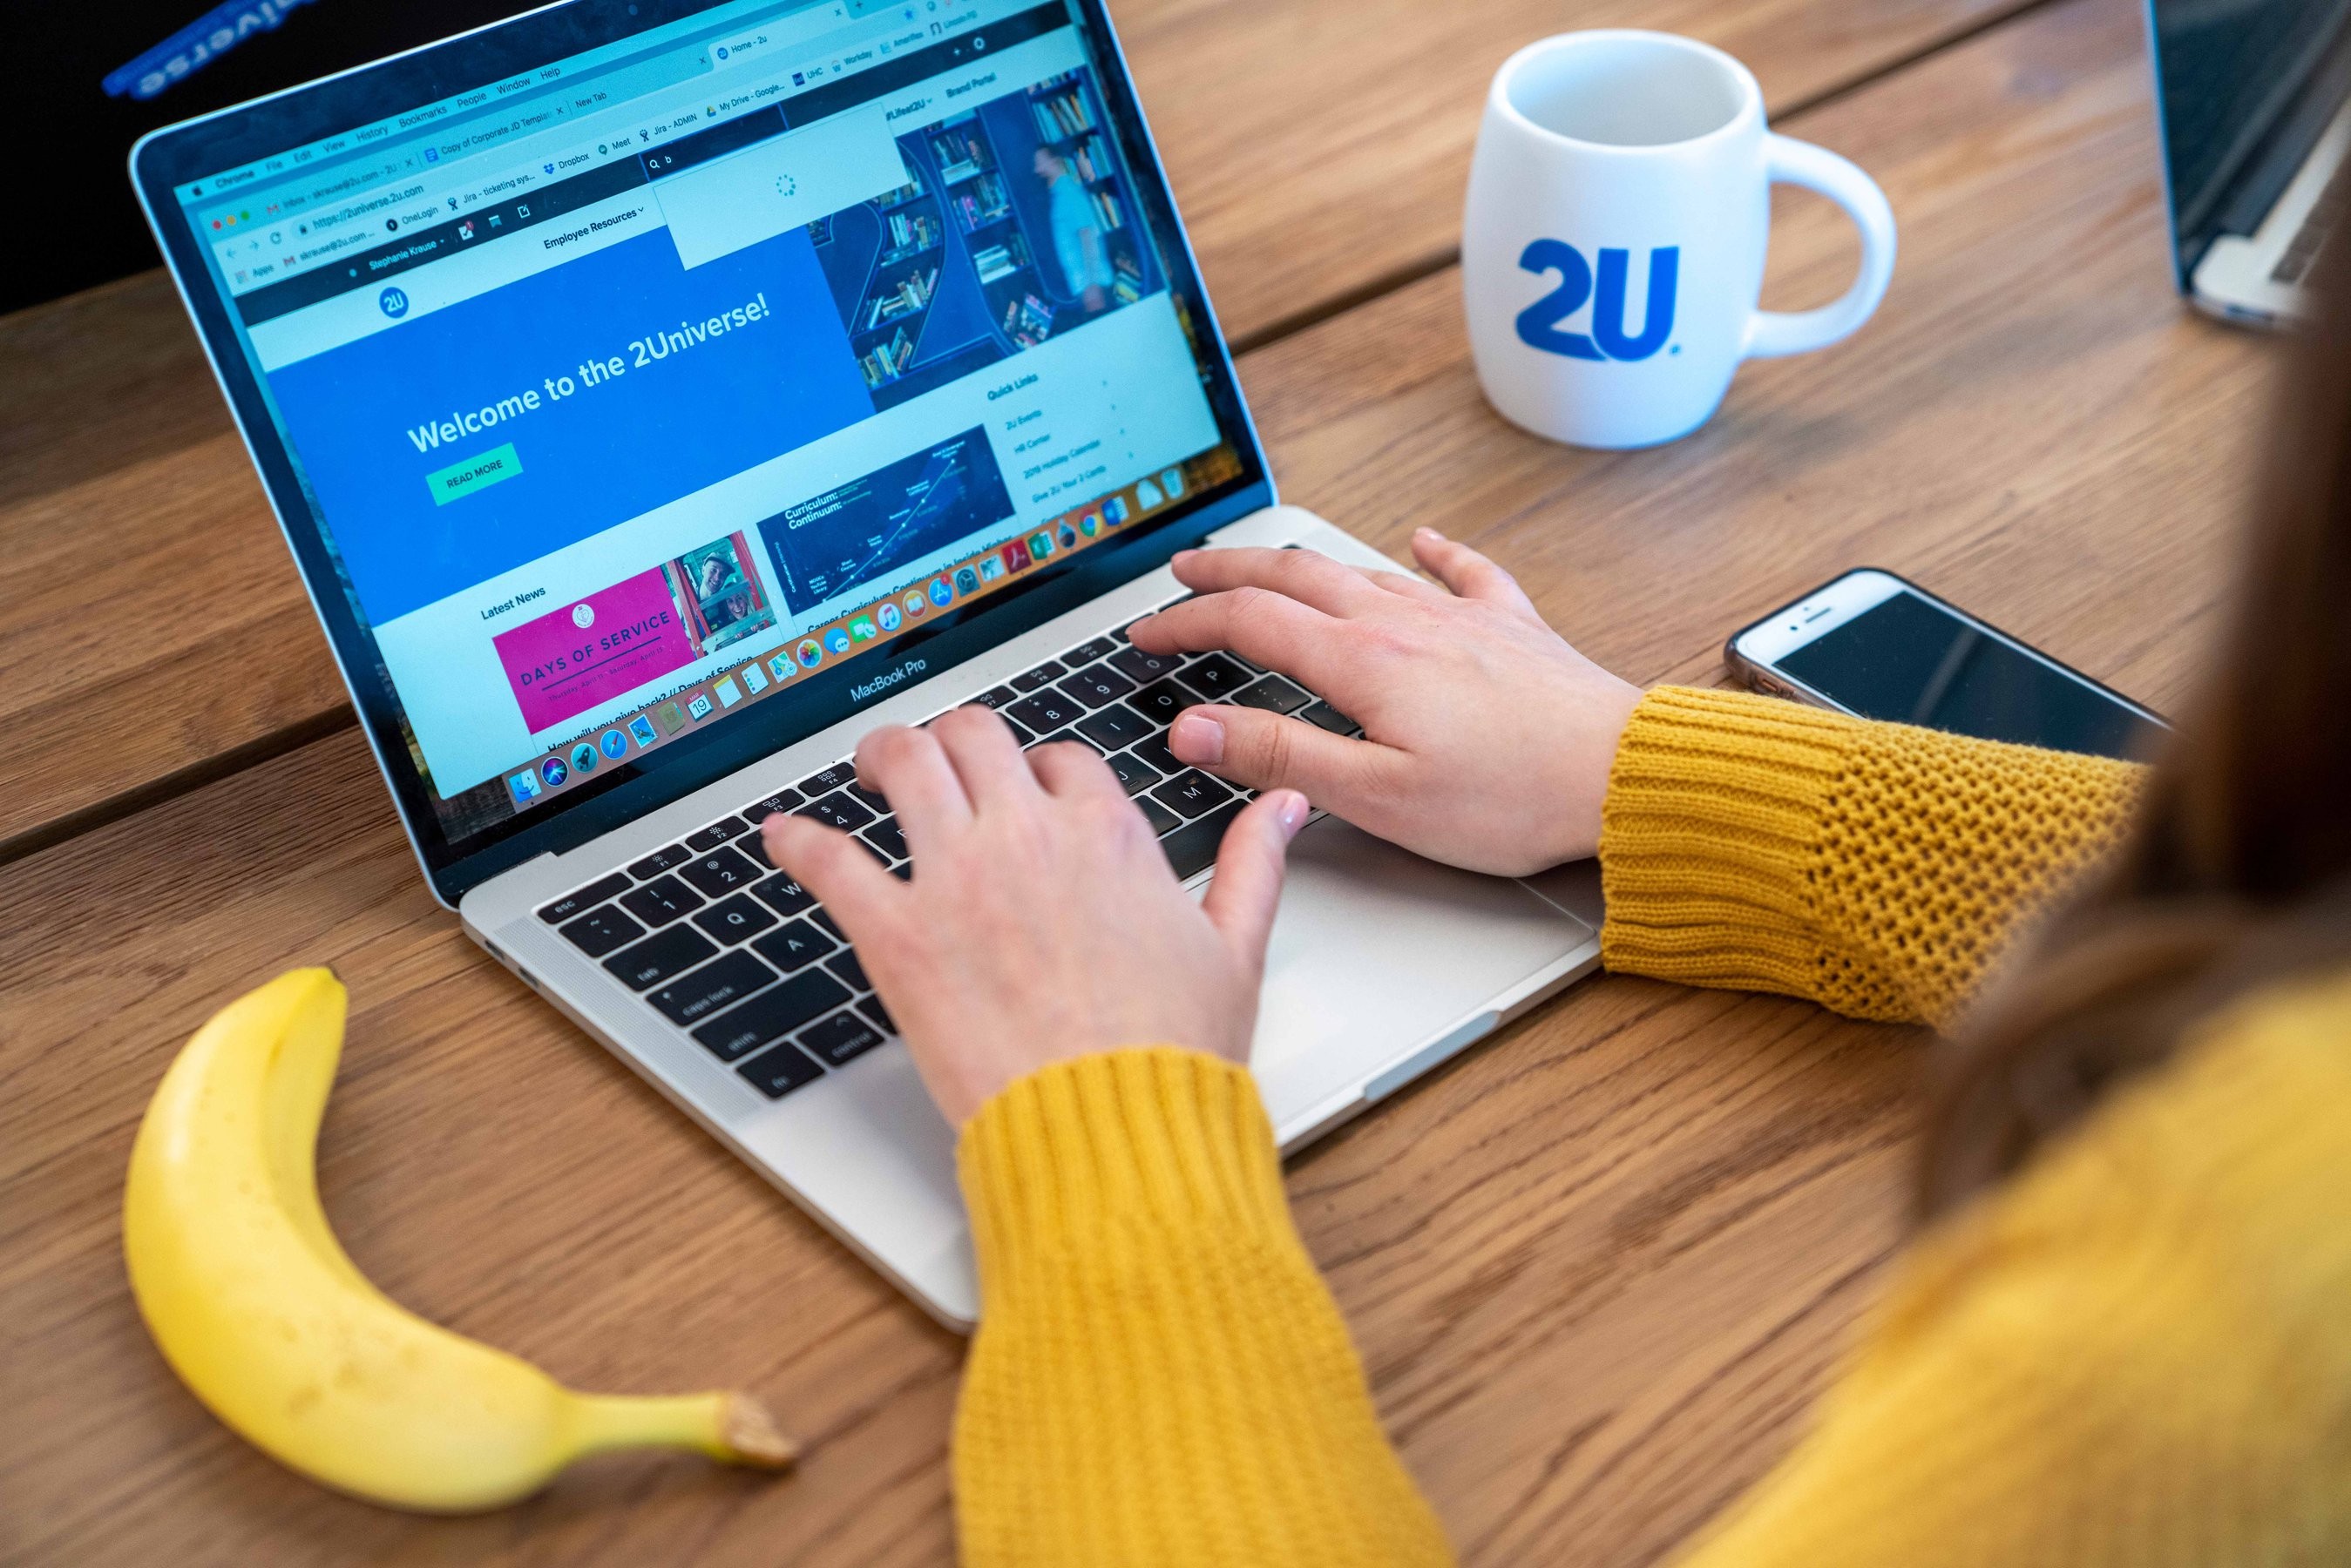 Woman on her laptop browses the 2Universe website with a 2U coffee mug and banana next to her